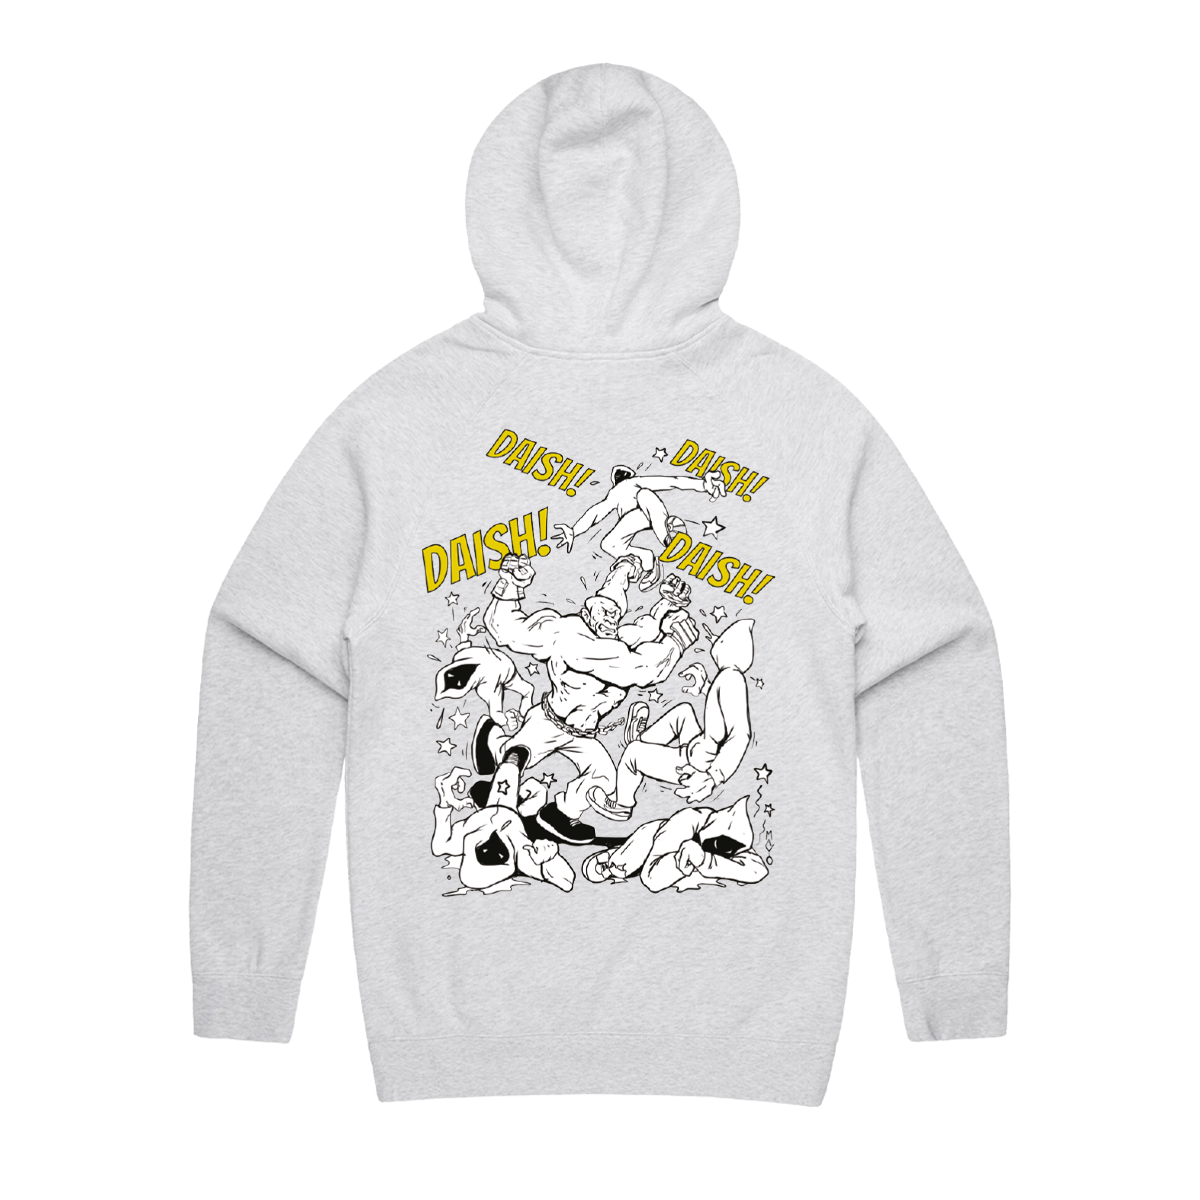 Dolin' Out Hoodie